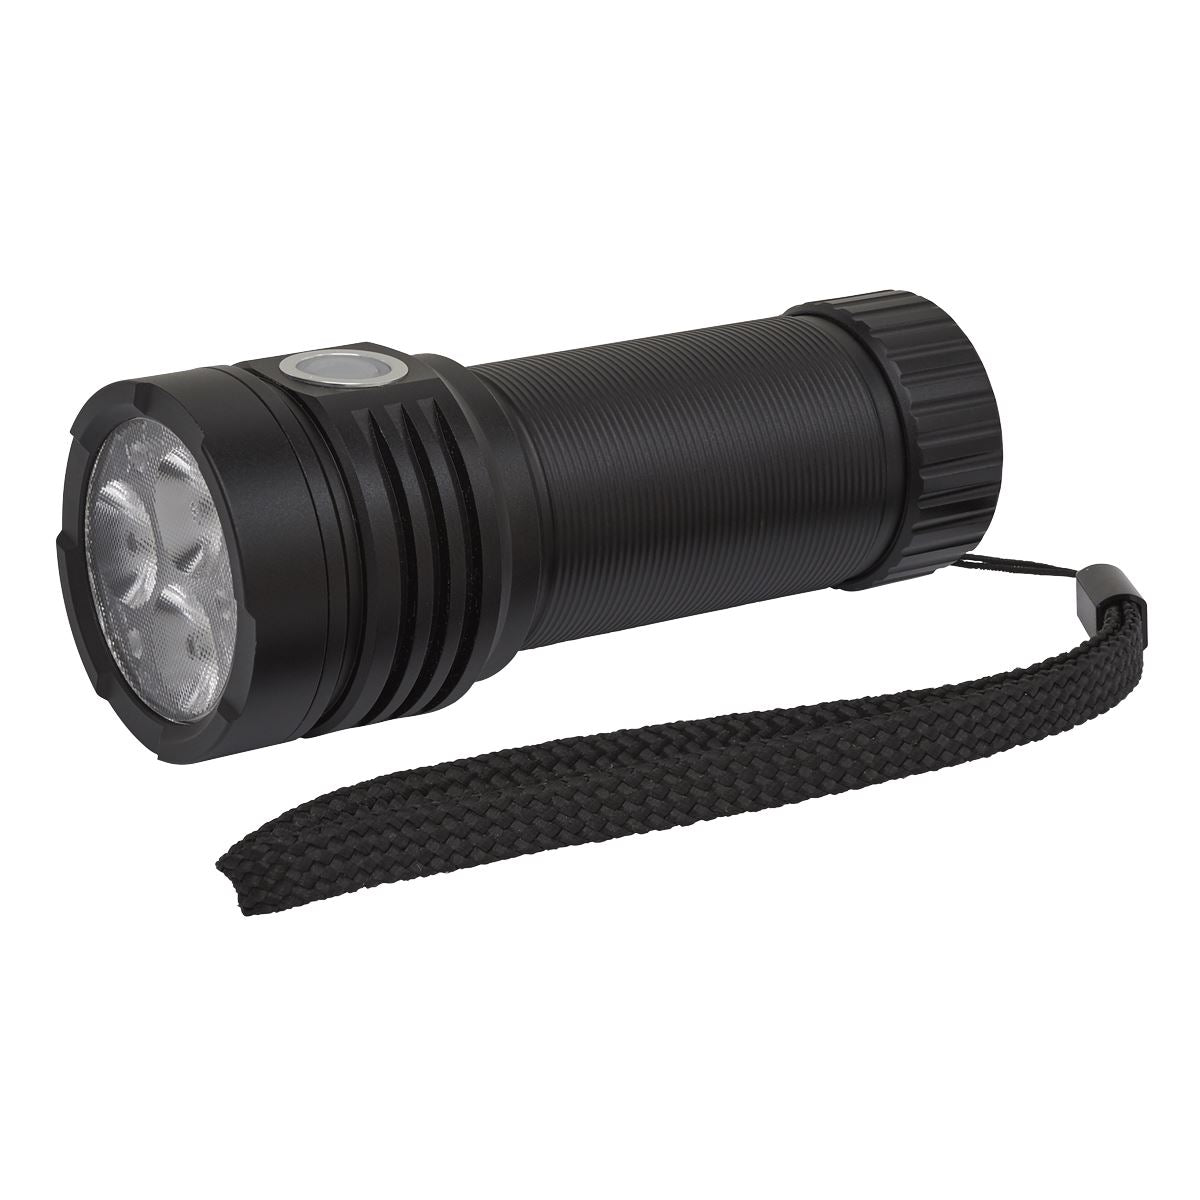 Sealey Pocket Light Torch Super Boost 3500 Lumens Rechargeable Osram P9 LED 30W